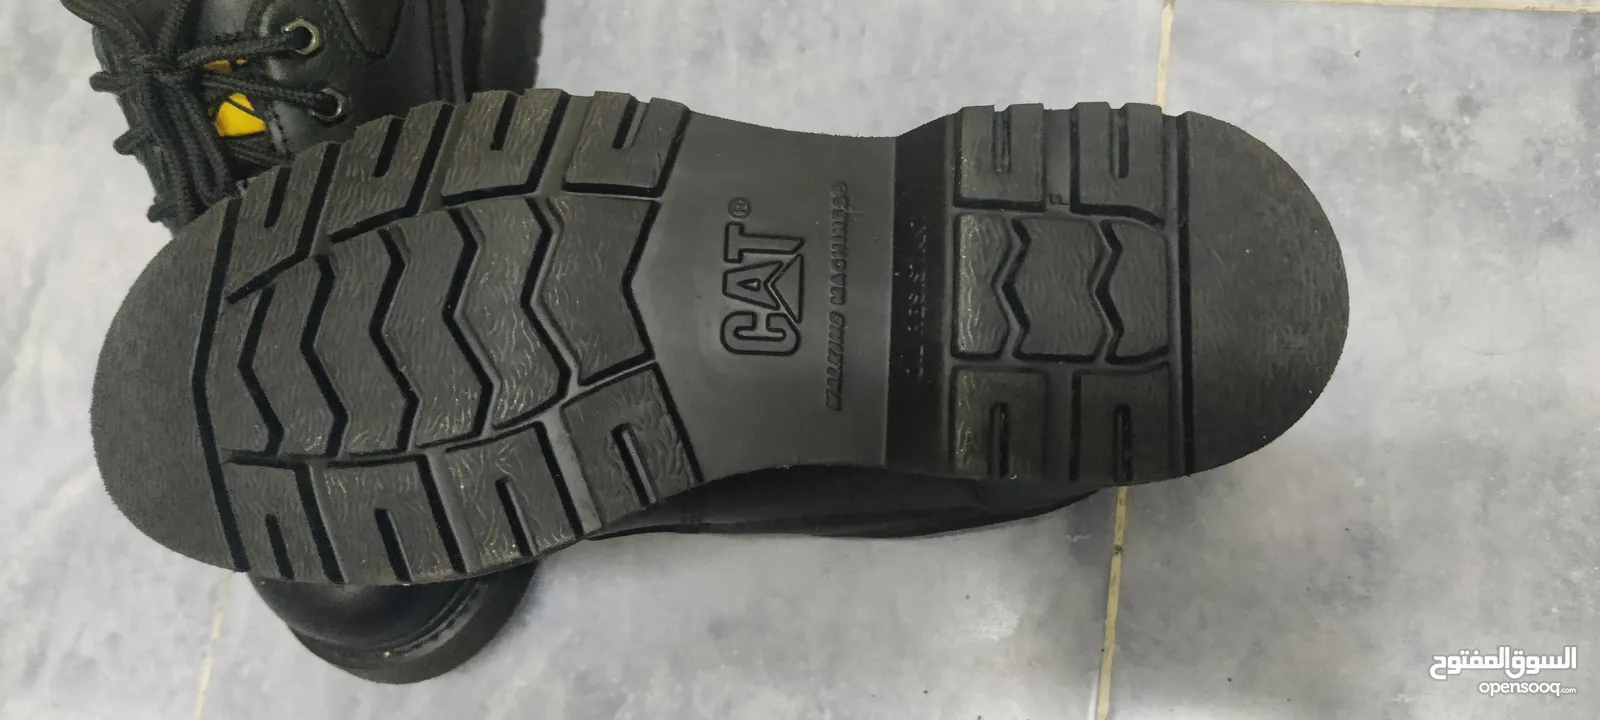 Cat Safety shoes brand new